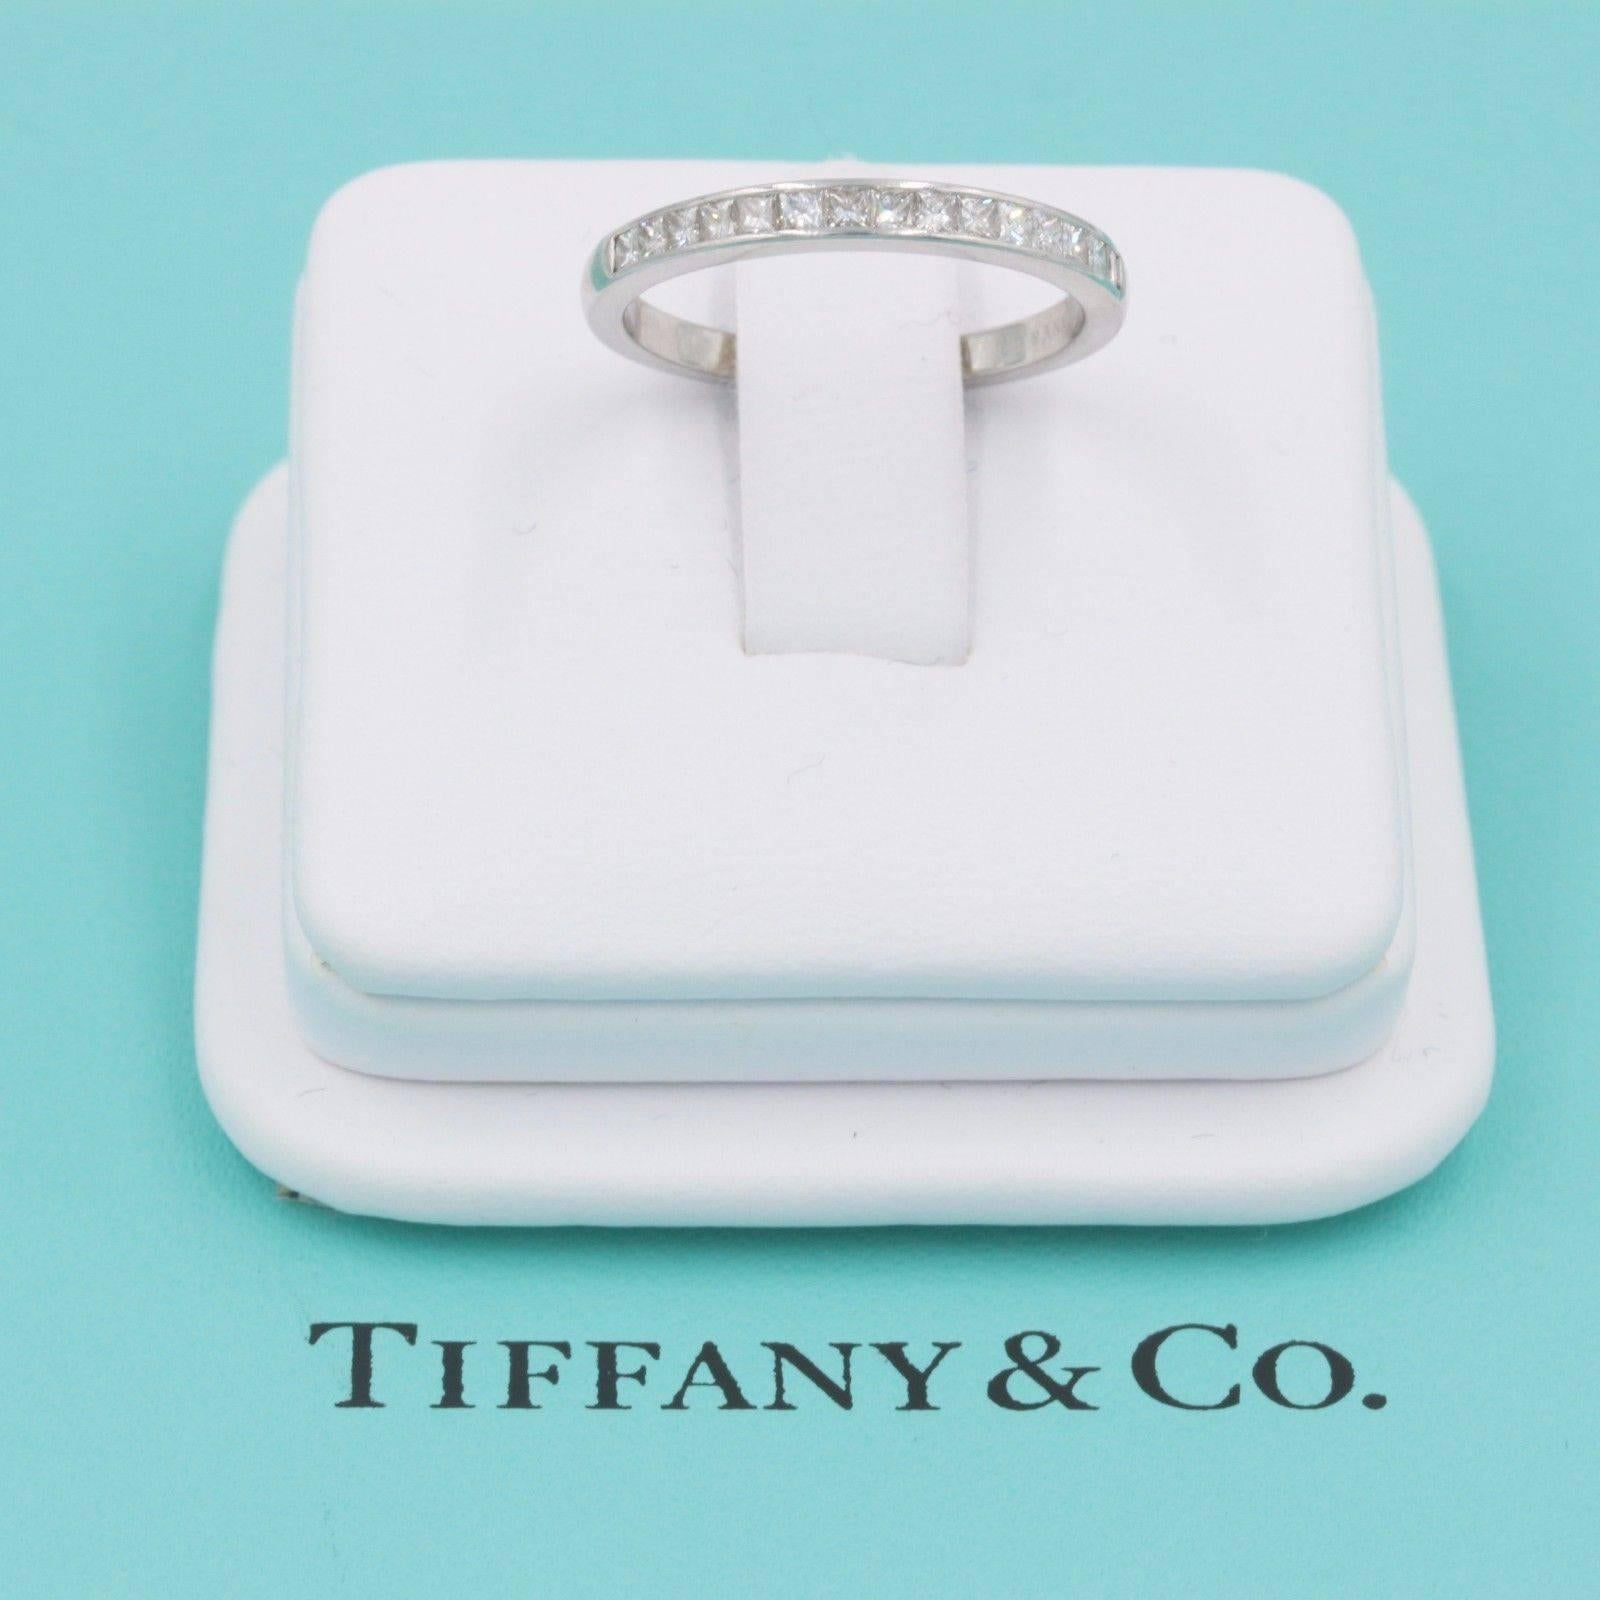 Tiffany & Co. Square Cut Diamond Wedding Band Ring in Platinum 0.39 tcw 2.6 MM For Sale 1